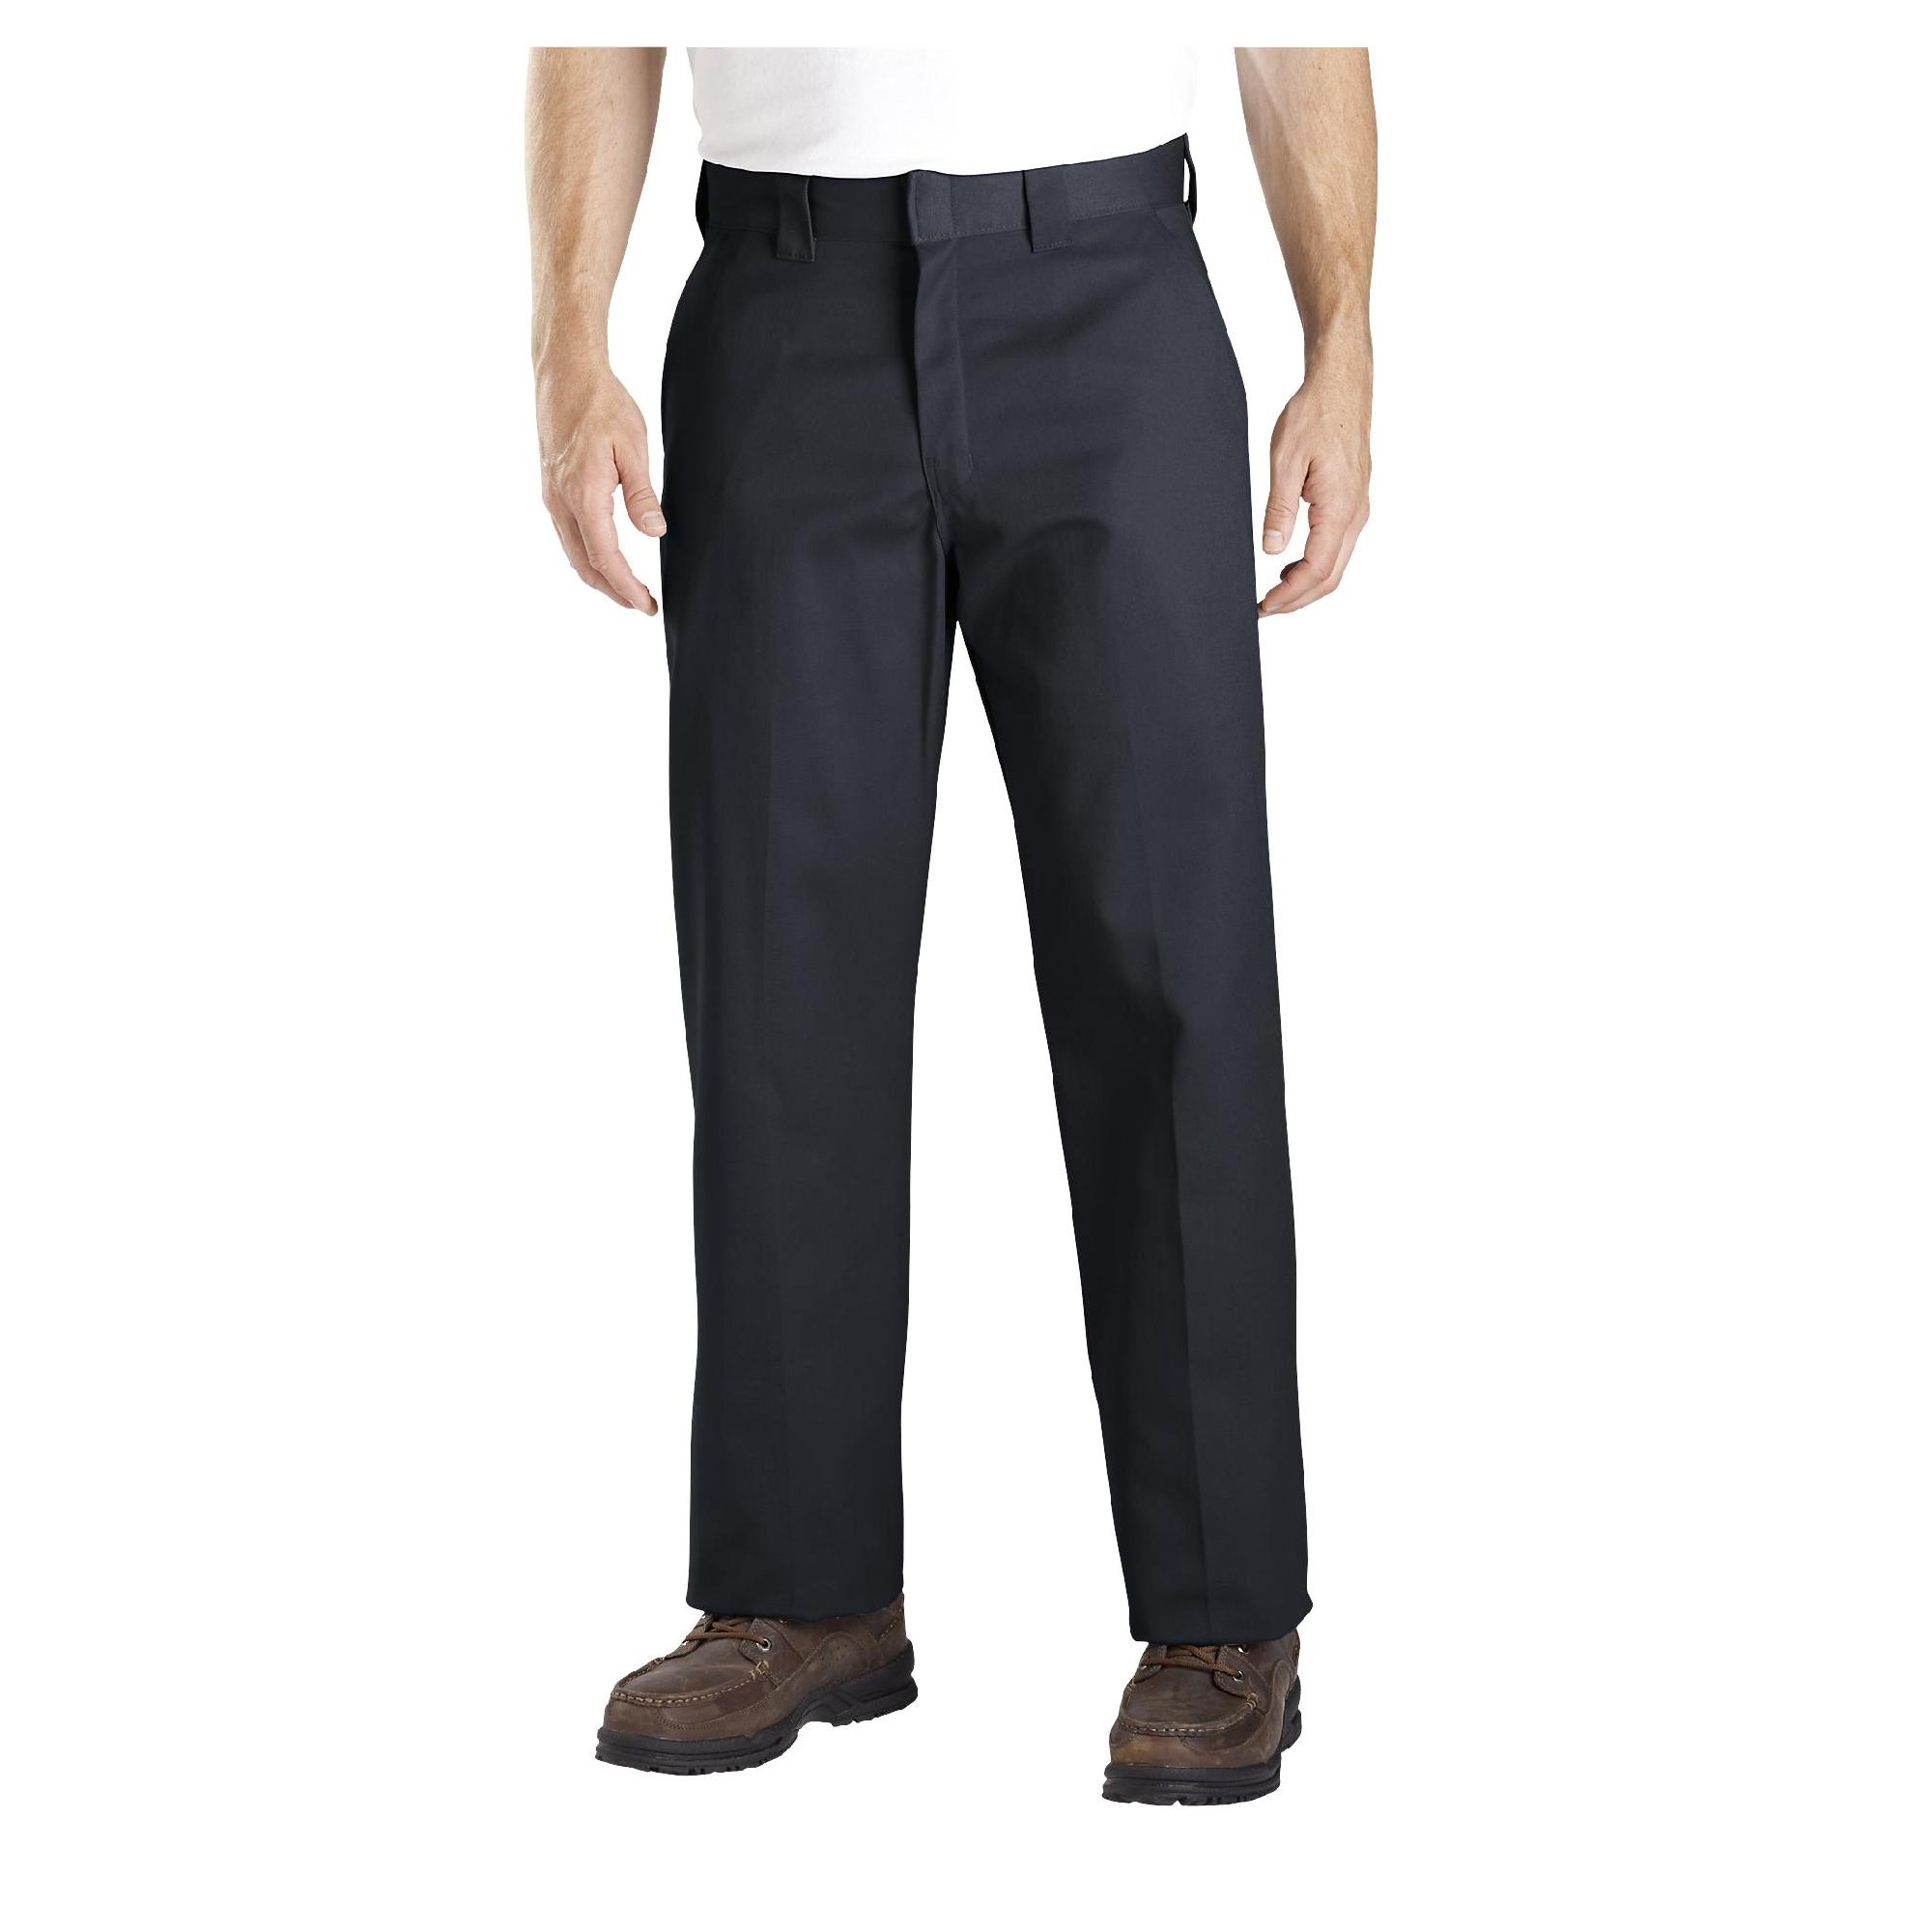 Men's Relaxed Straight Fit Work Pant: Find a Great Fit at Sears